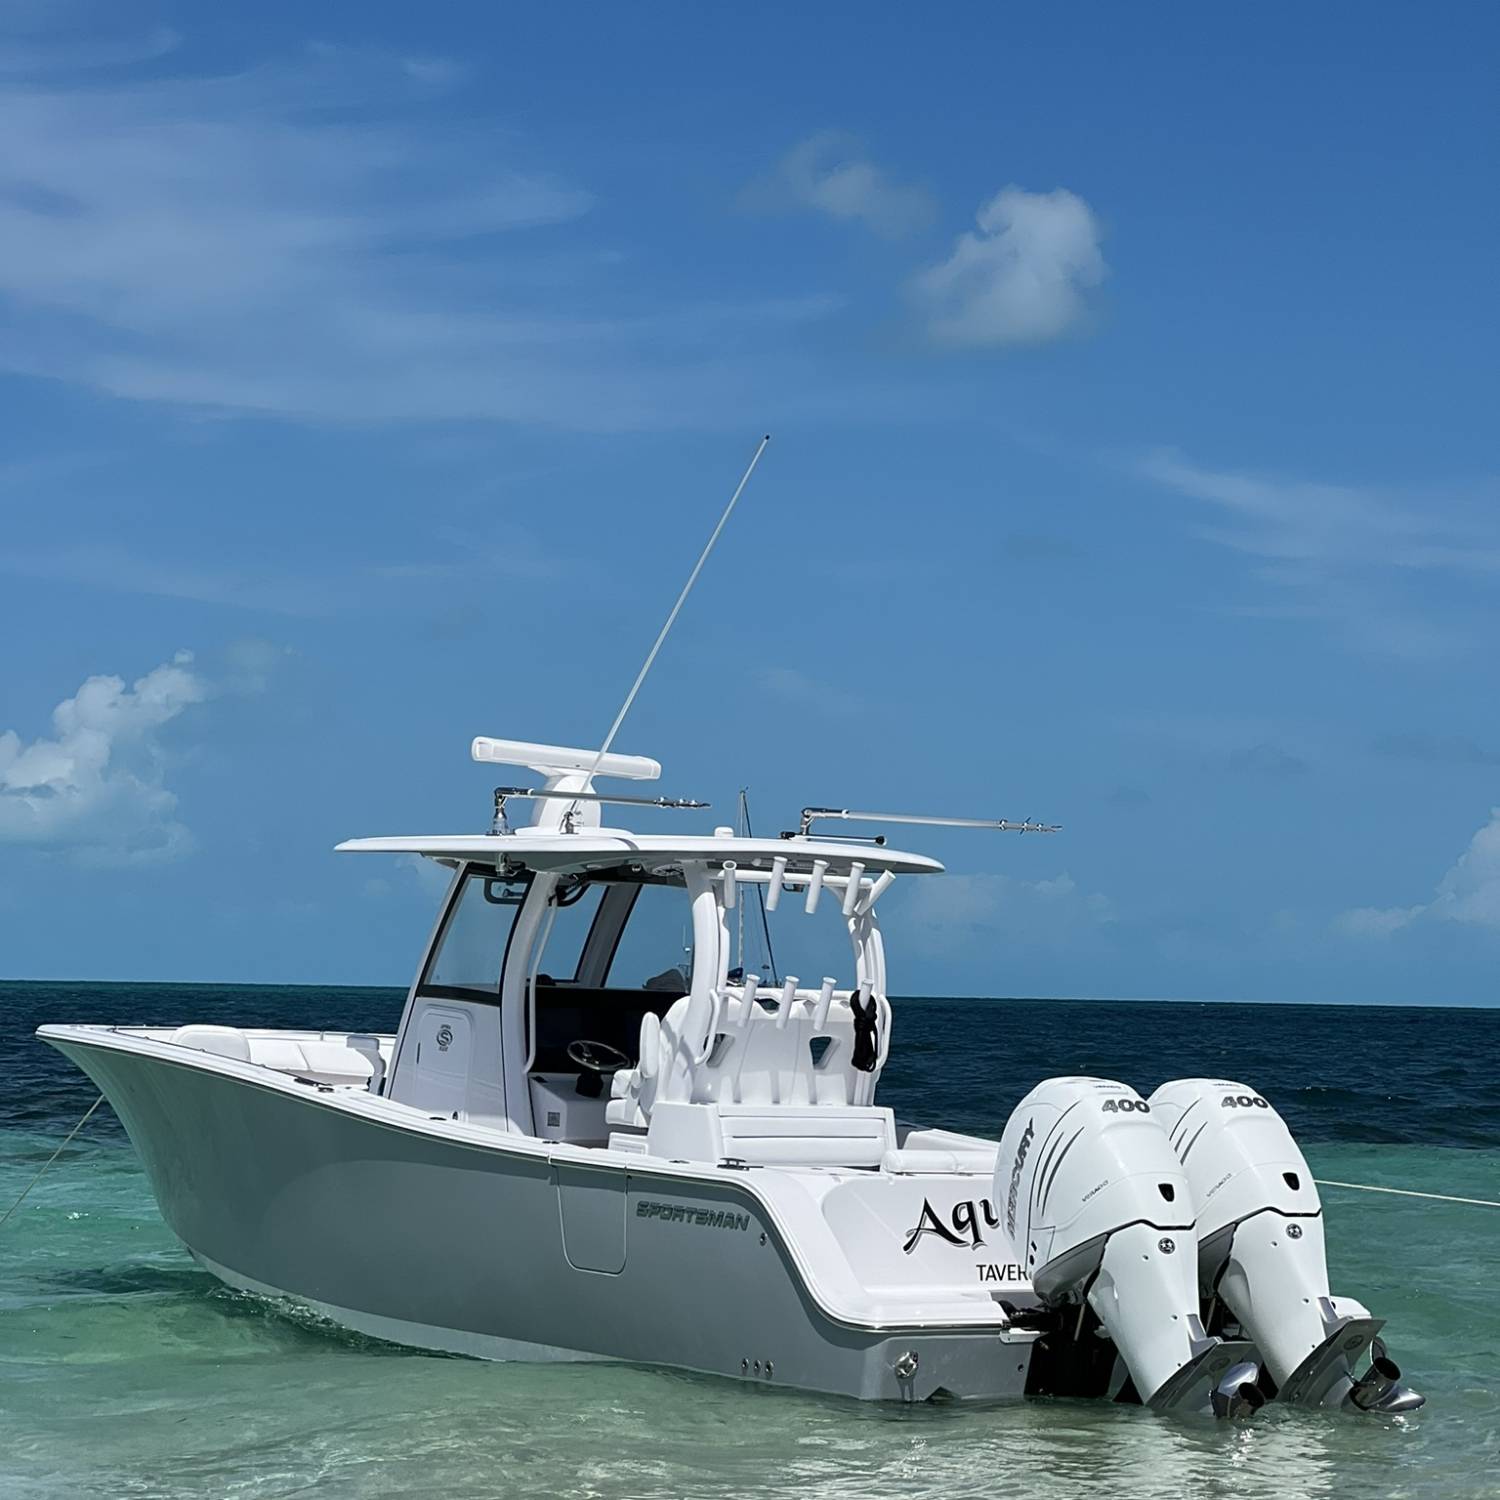 Title: Aquaholic IV - On board their Sportsman Open 322 Center Console - Location: Bimini. Participating in the Photo Contest #SportsmanMarch2023